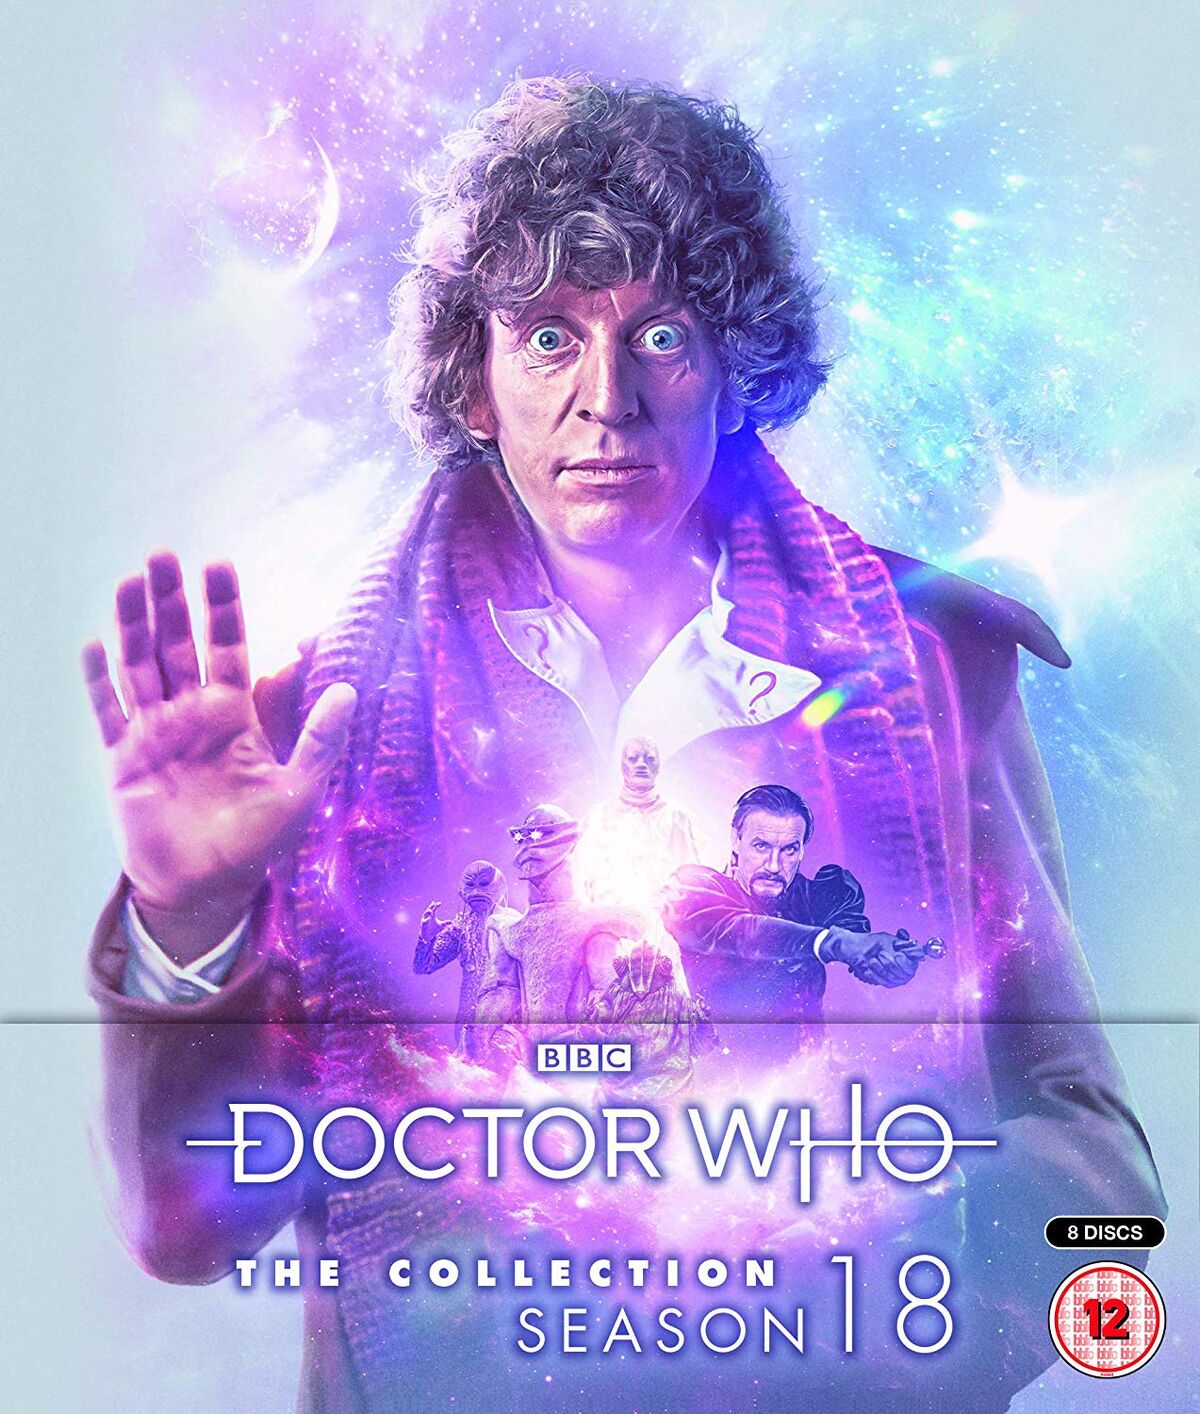 The Two Doctors, Doctor Who DVD Special Features Index Wiki